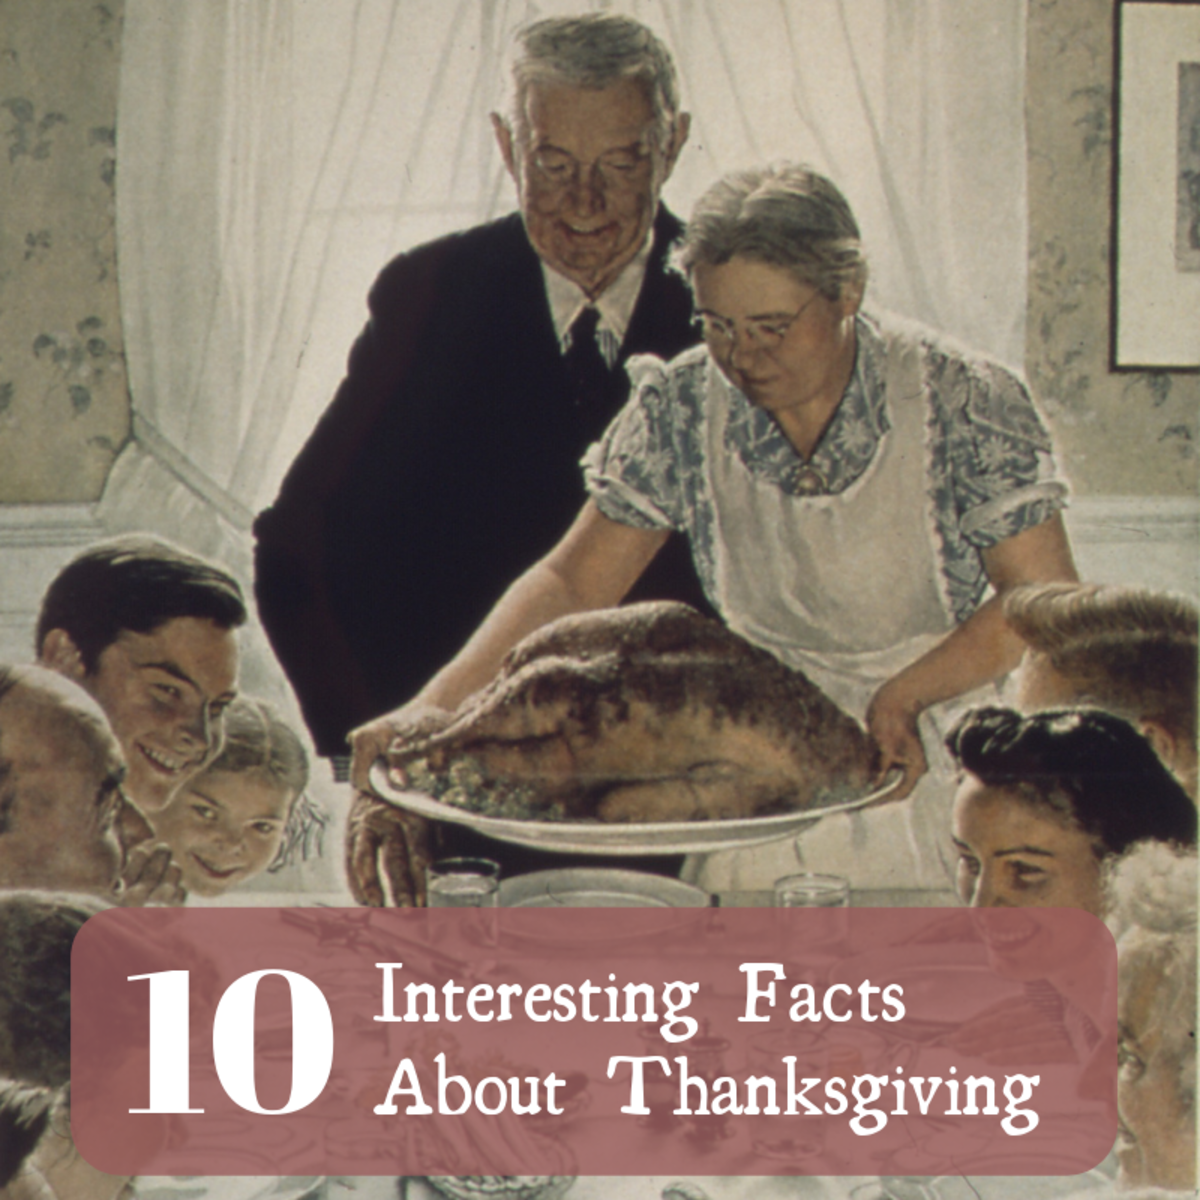 10 Unique and Interesting Fun Facts About Thanksgiving